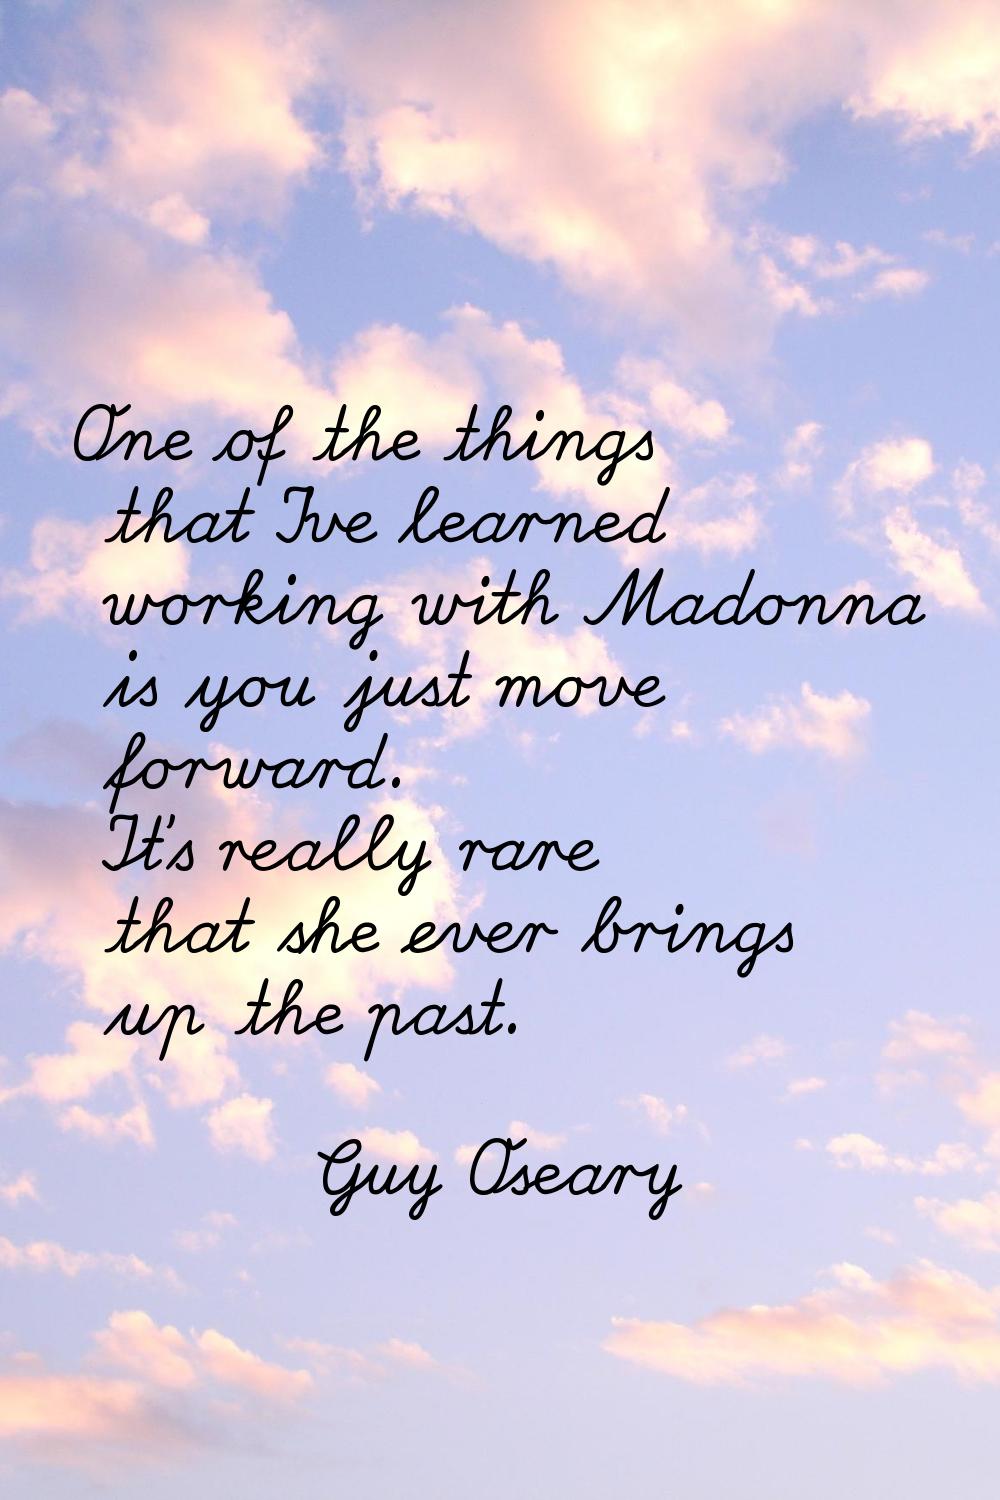 One of the things that I've learned working with Madonna is you just move forward. It's really rare